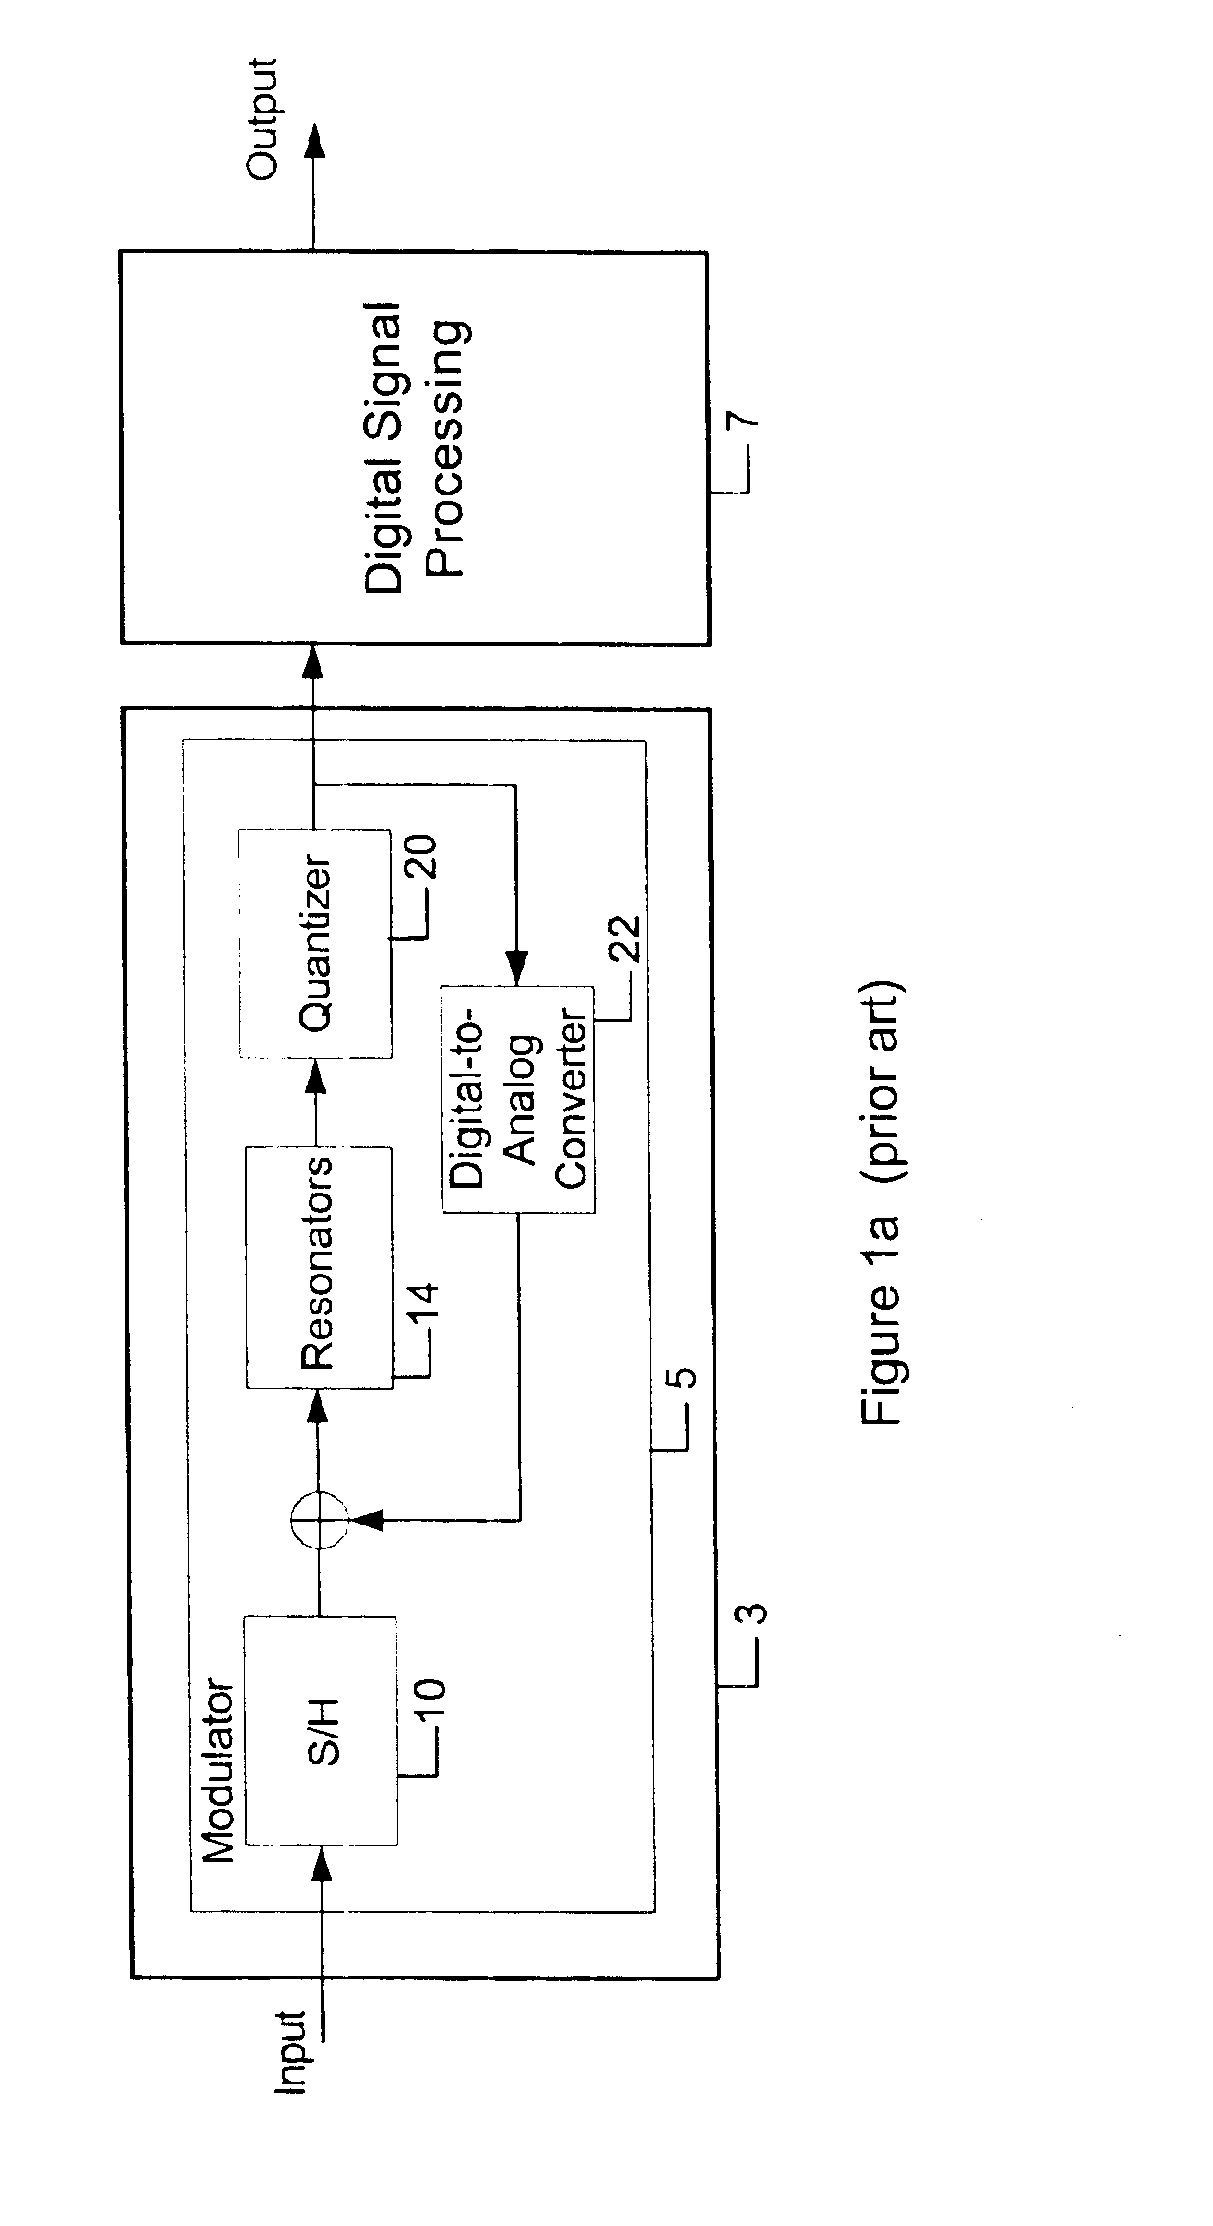 Low distortion band-pass analog to digital converter with feed forward